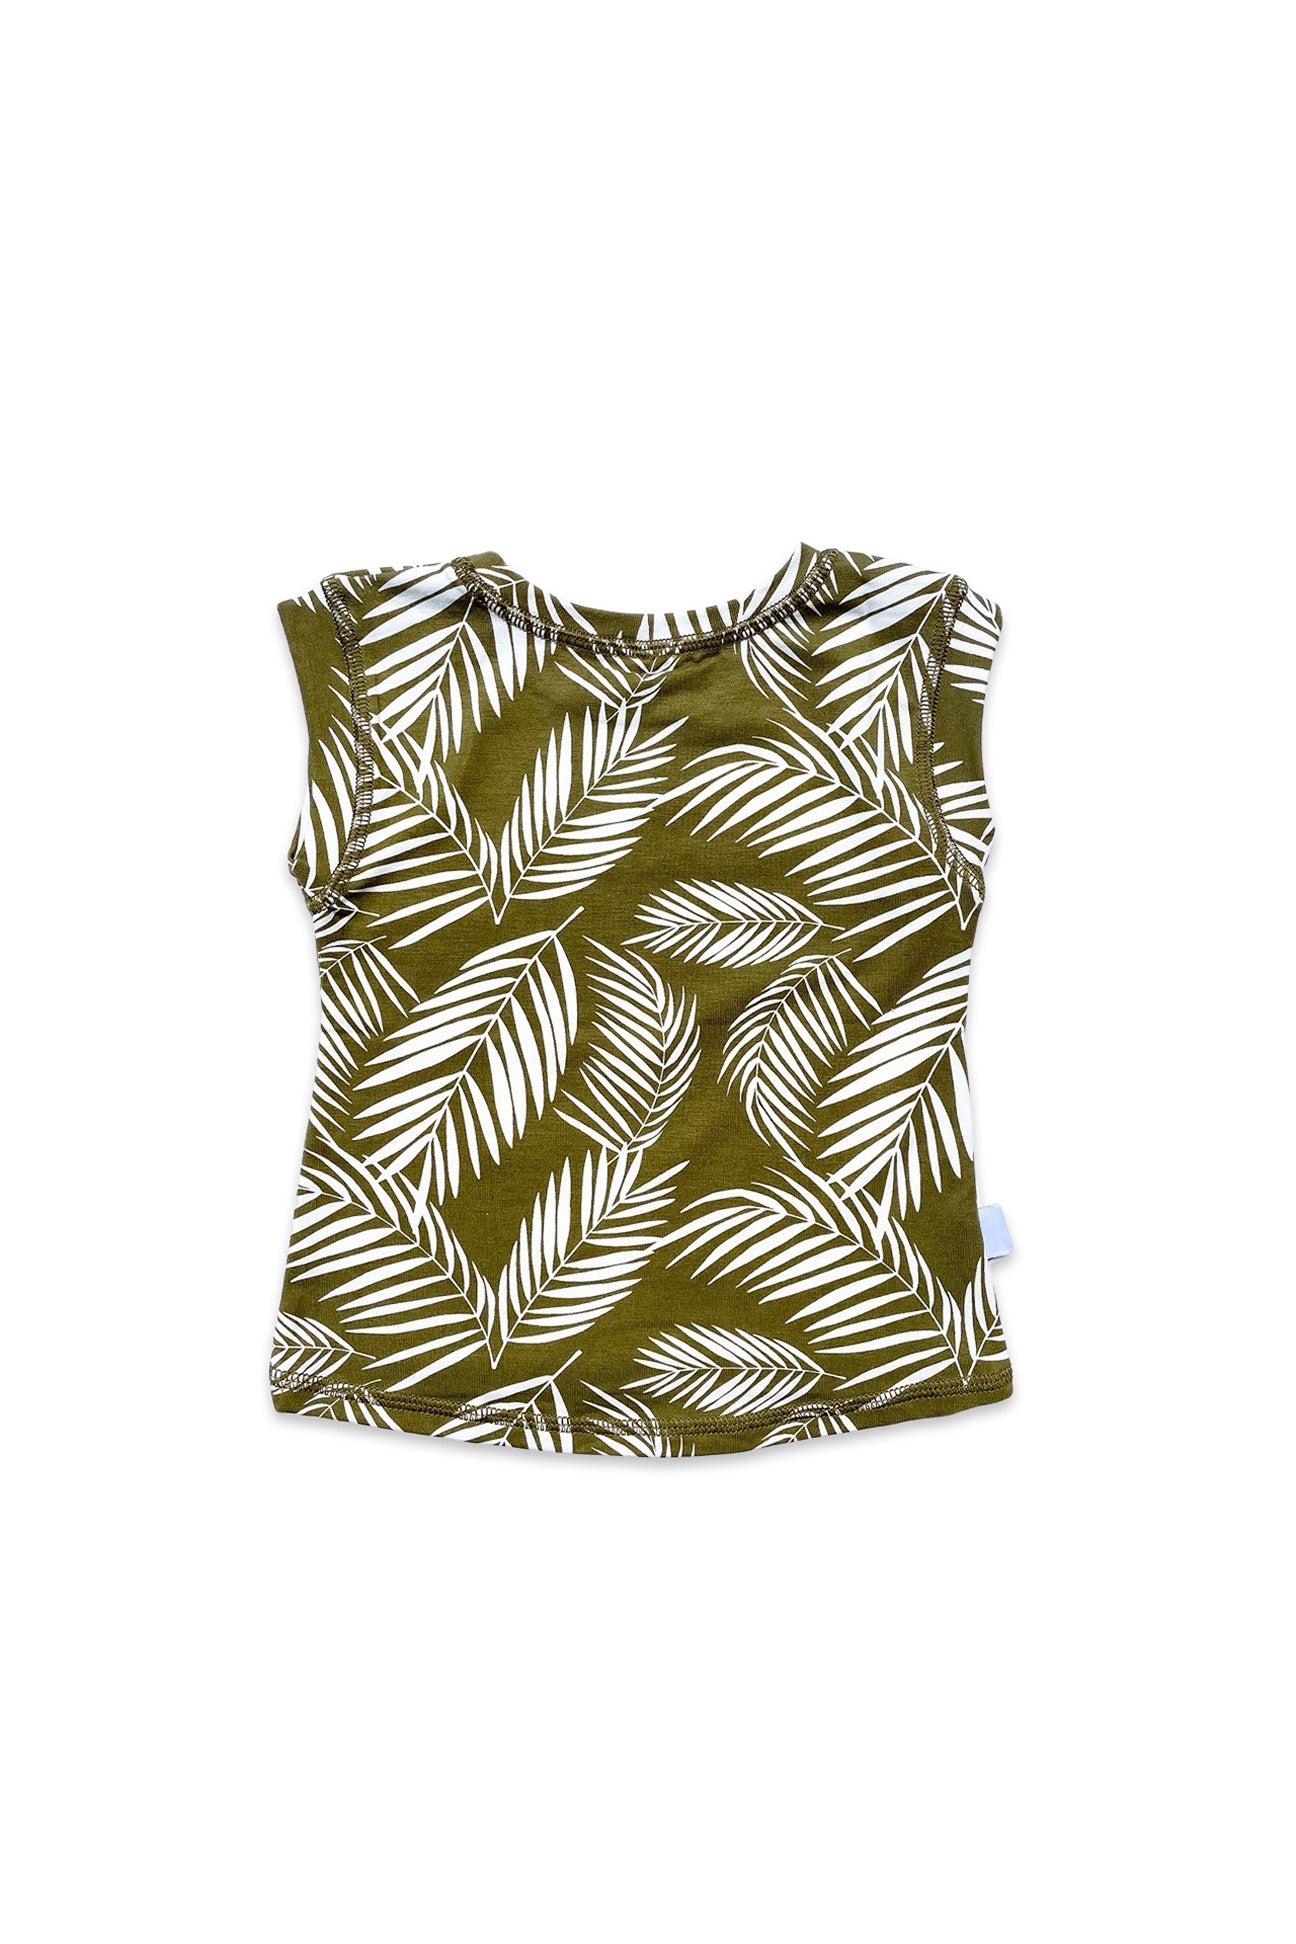 Box Tee - Olive Fronds